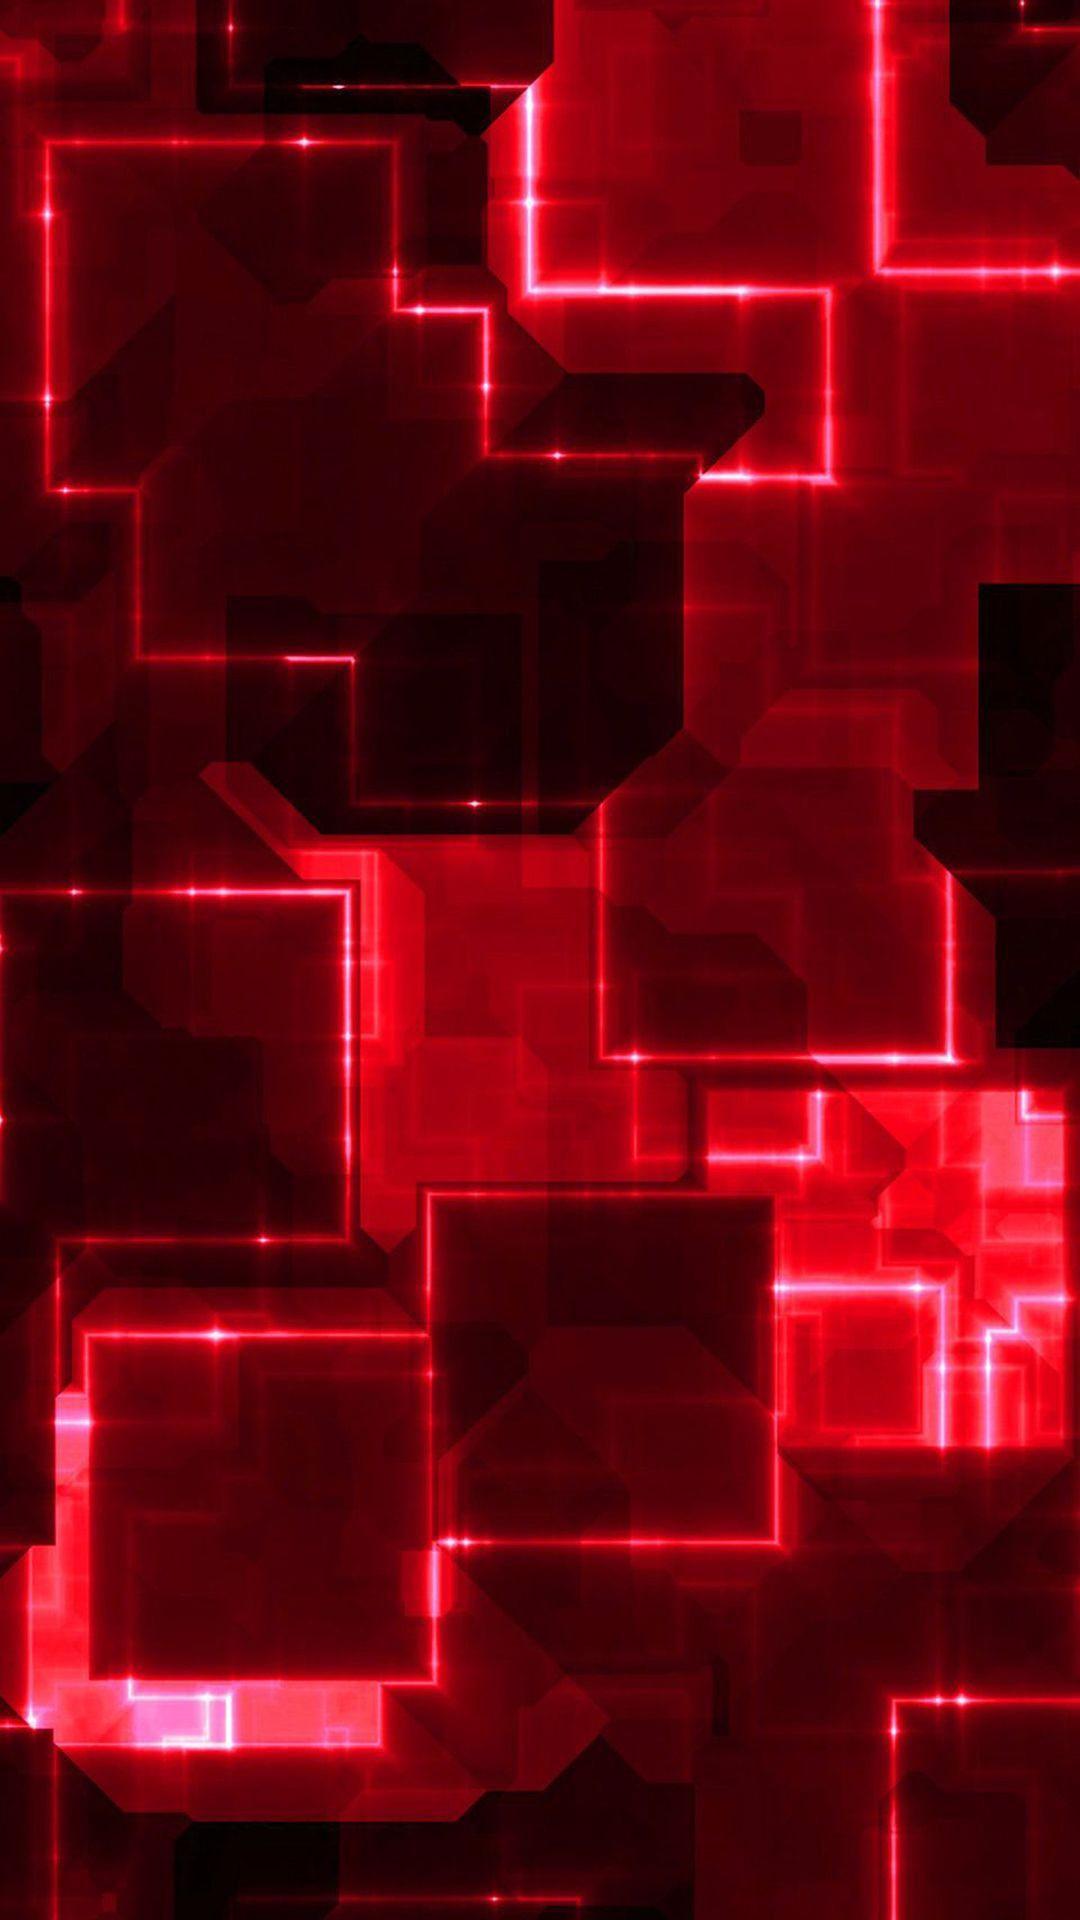 A red and black abstract pattern - IPhone red, light red, red, neon red